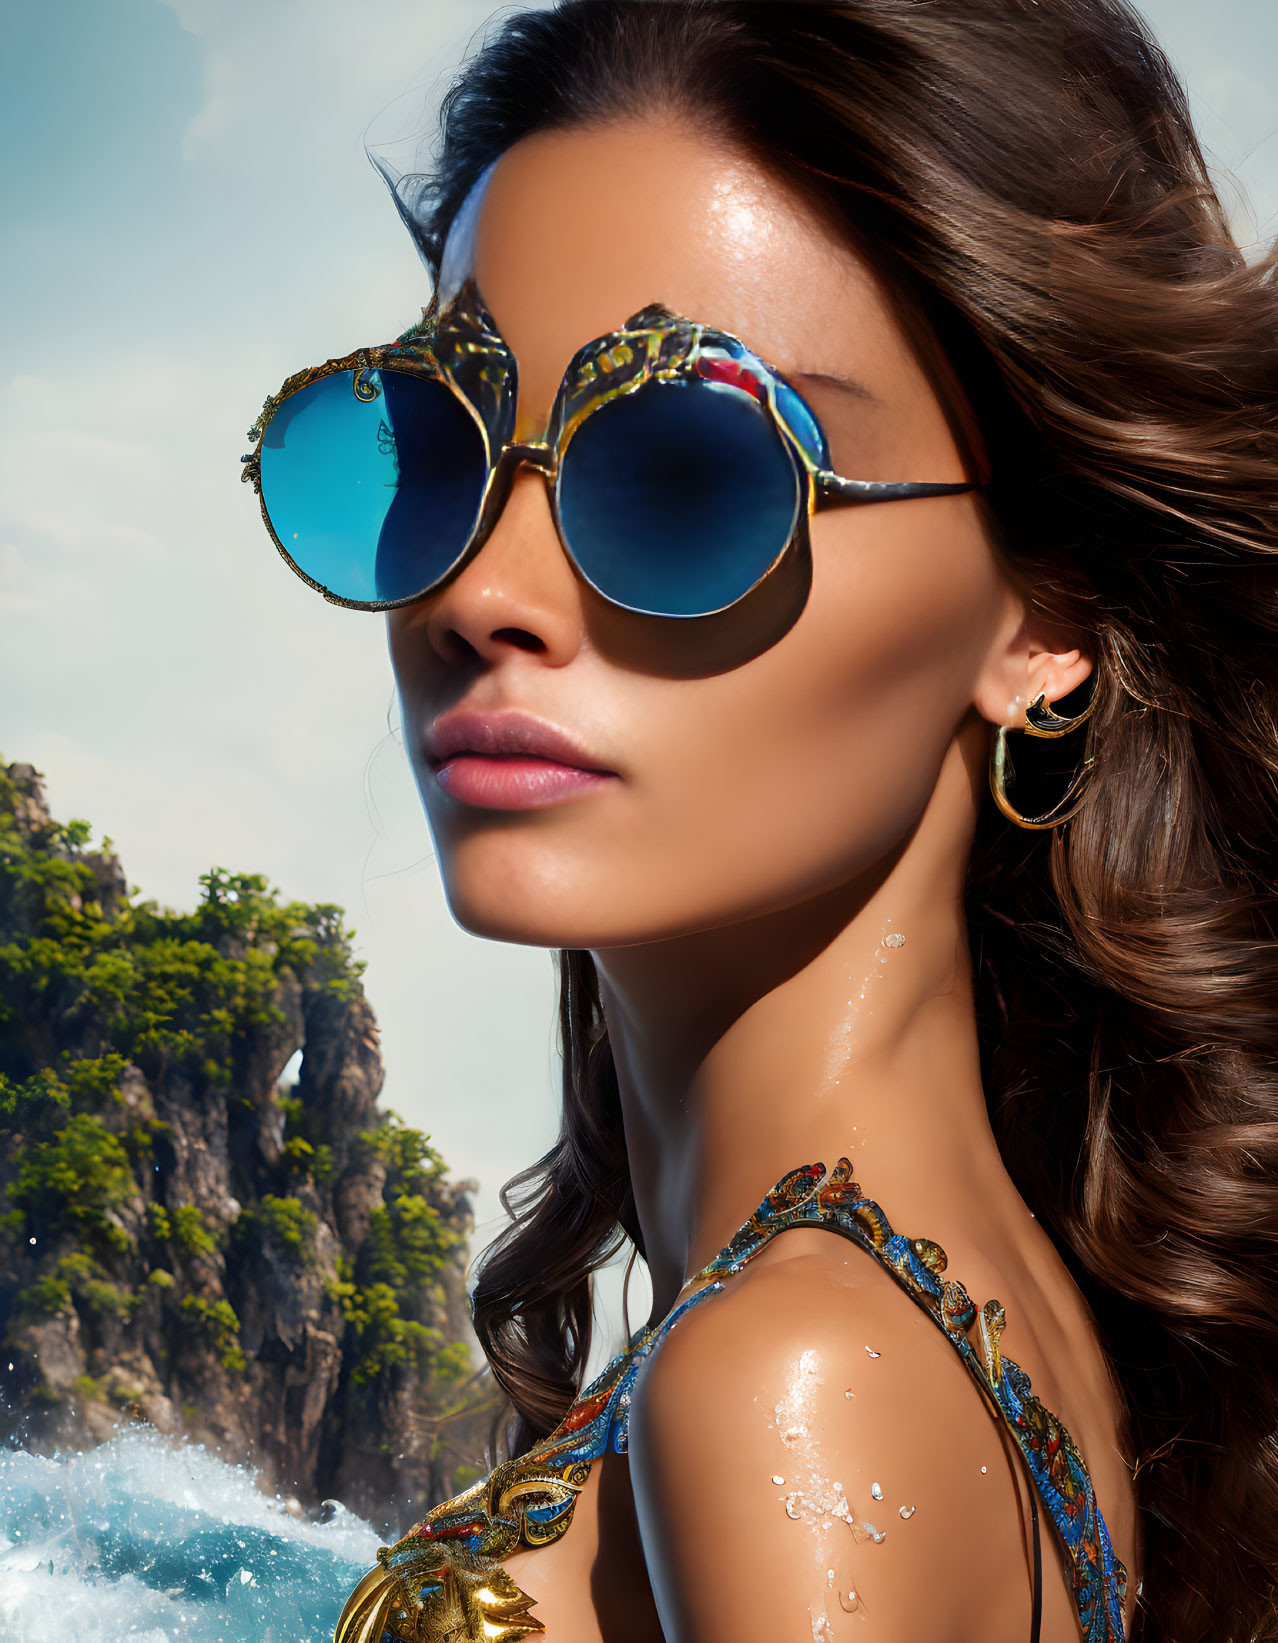 Woman modeling sunglasses with tropical seascape reflection and wavy hair.